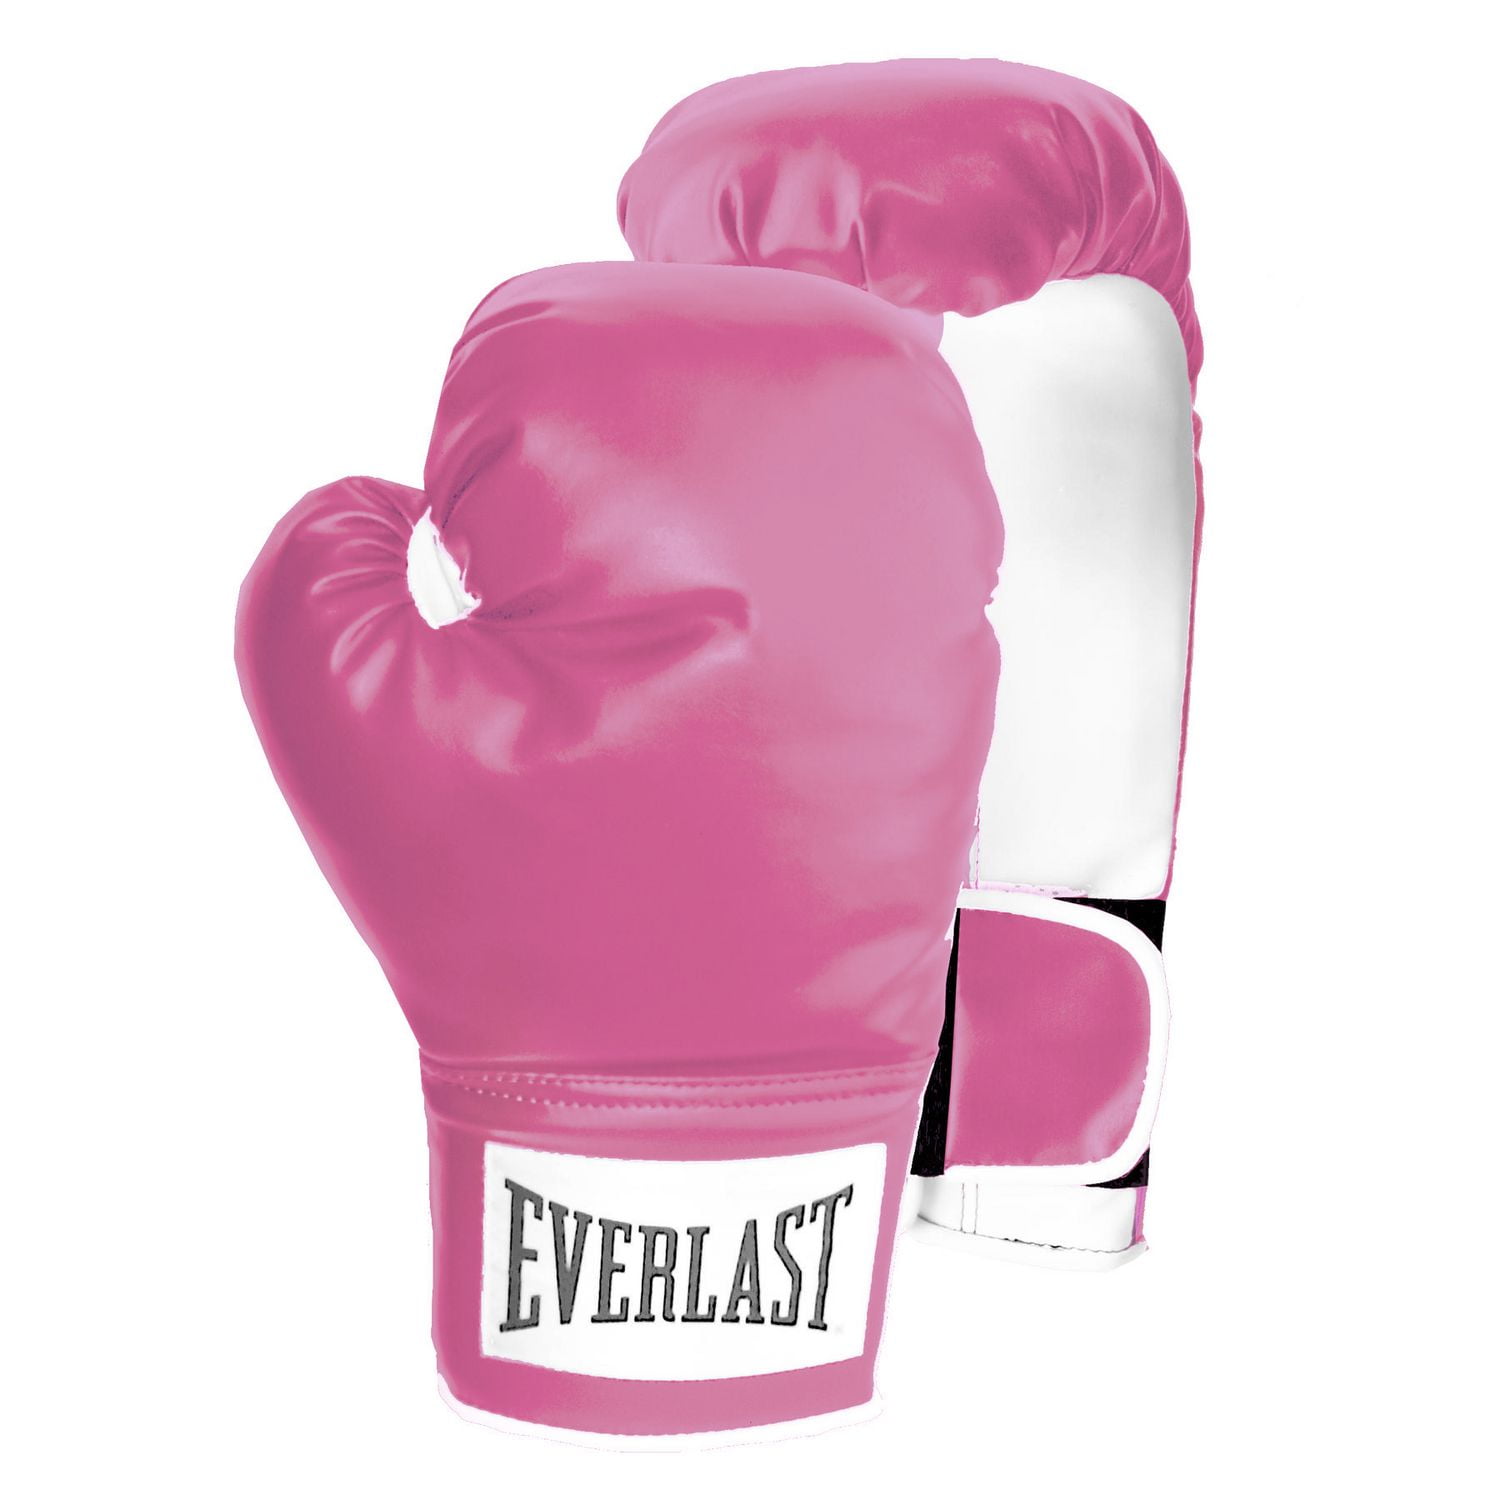 Everlast Classic Boxing Training Gloves Pink 